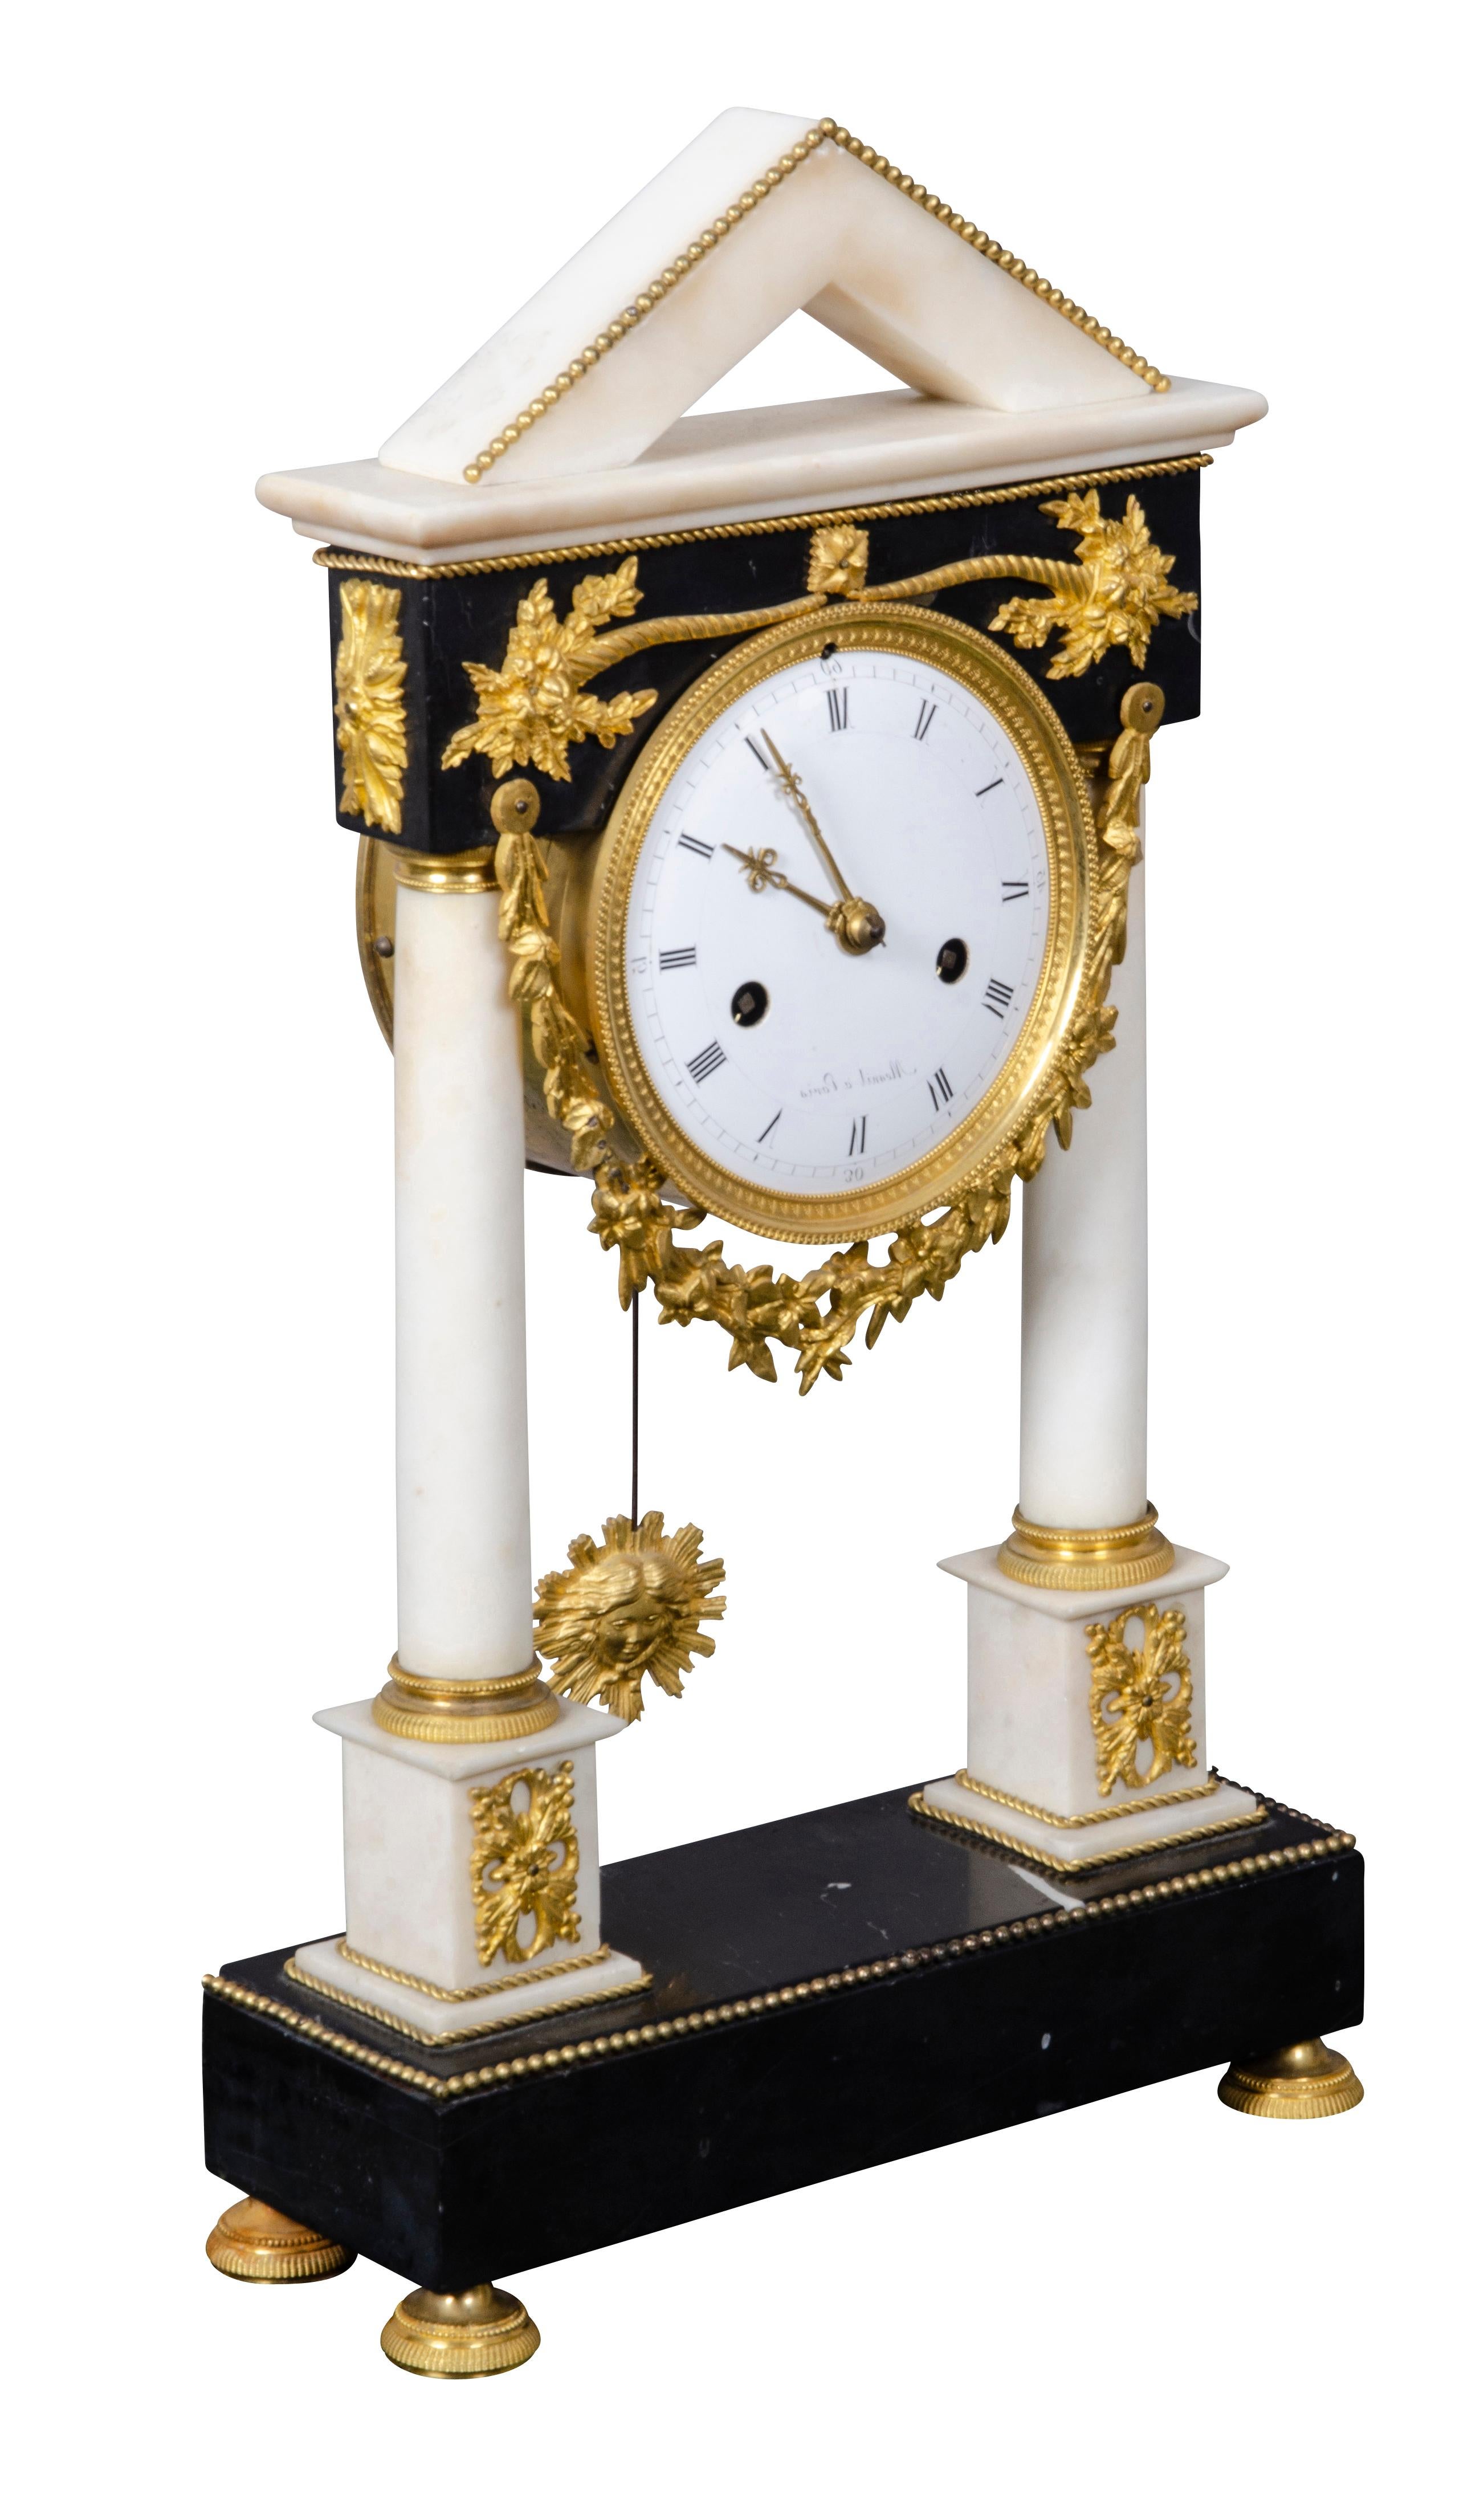 With pointed architectural pediment over an enamel clock face with signature of Mesnil of Paris. With black marble frieze and white marble columns with bronze mounts on a rectangular marble plinth and bun feet.